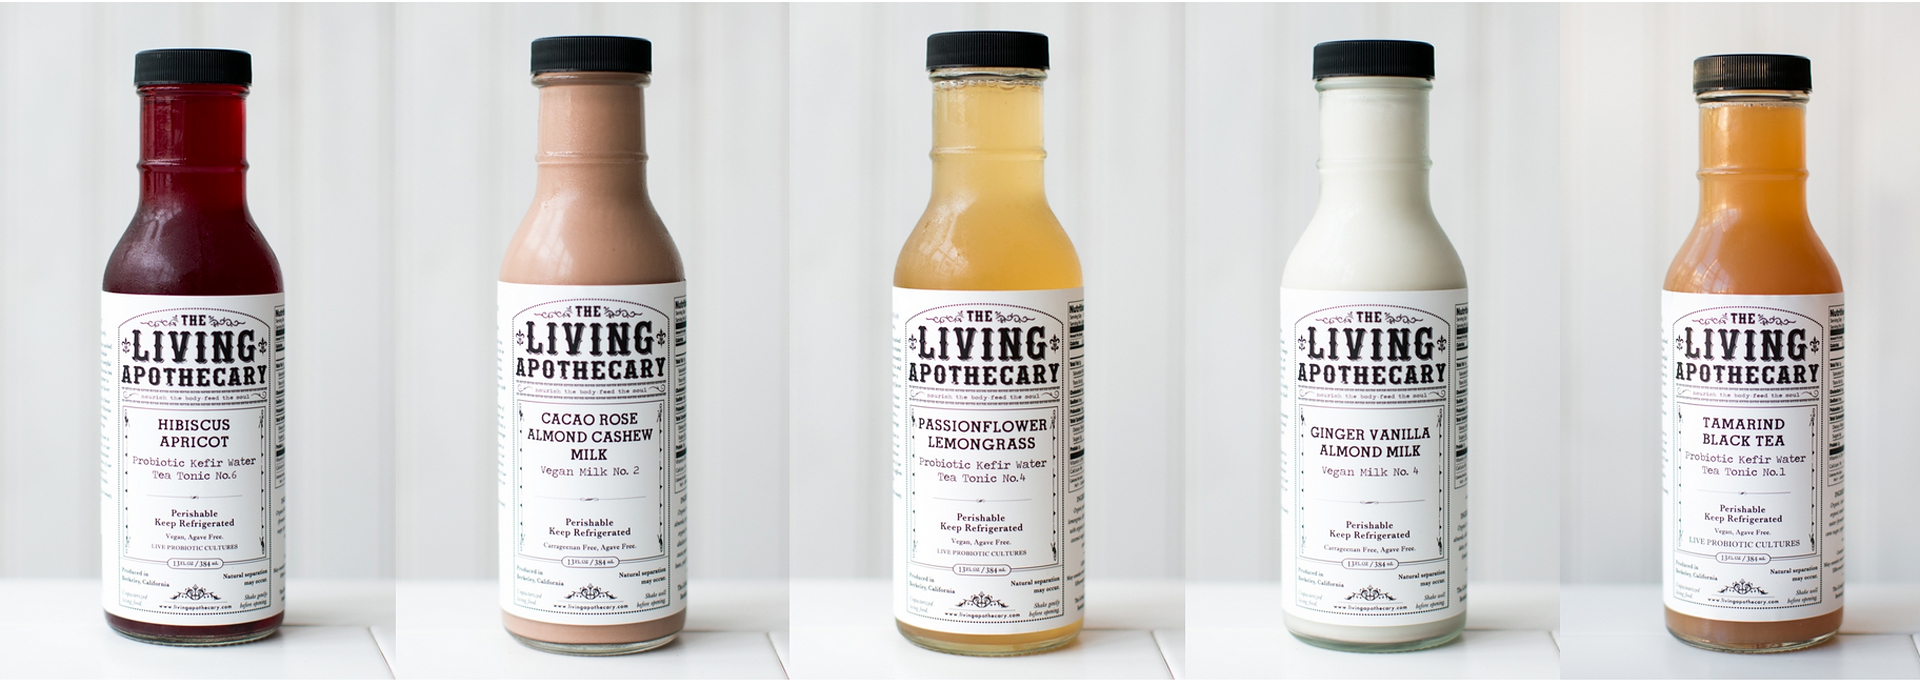 The Living Apothecary is known for its flavored almond milks and pro-biotic tonics.